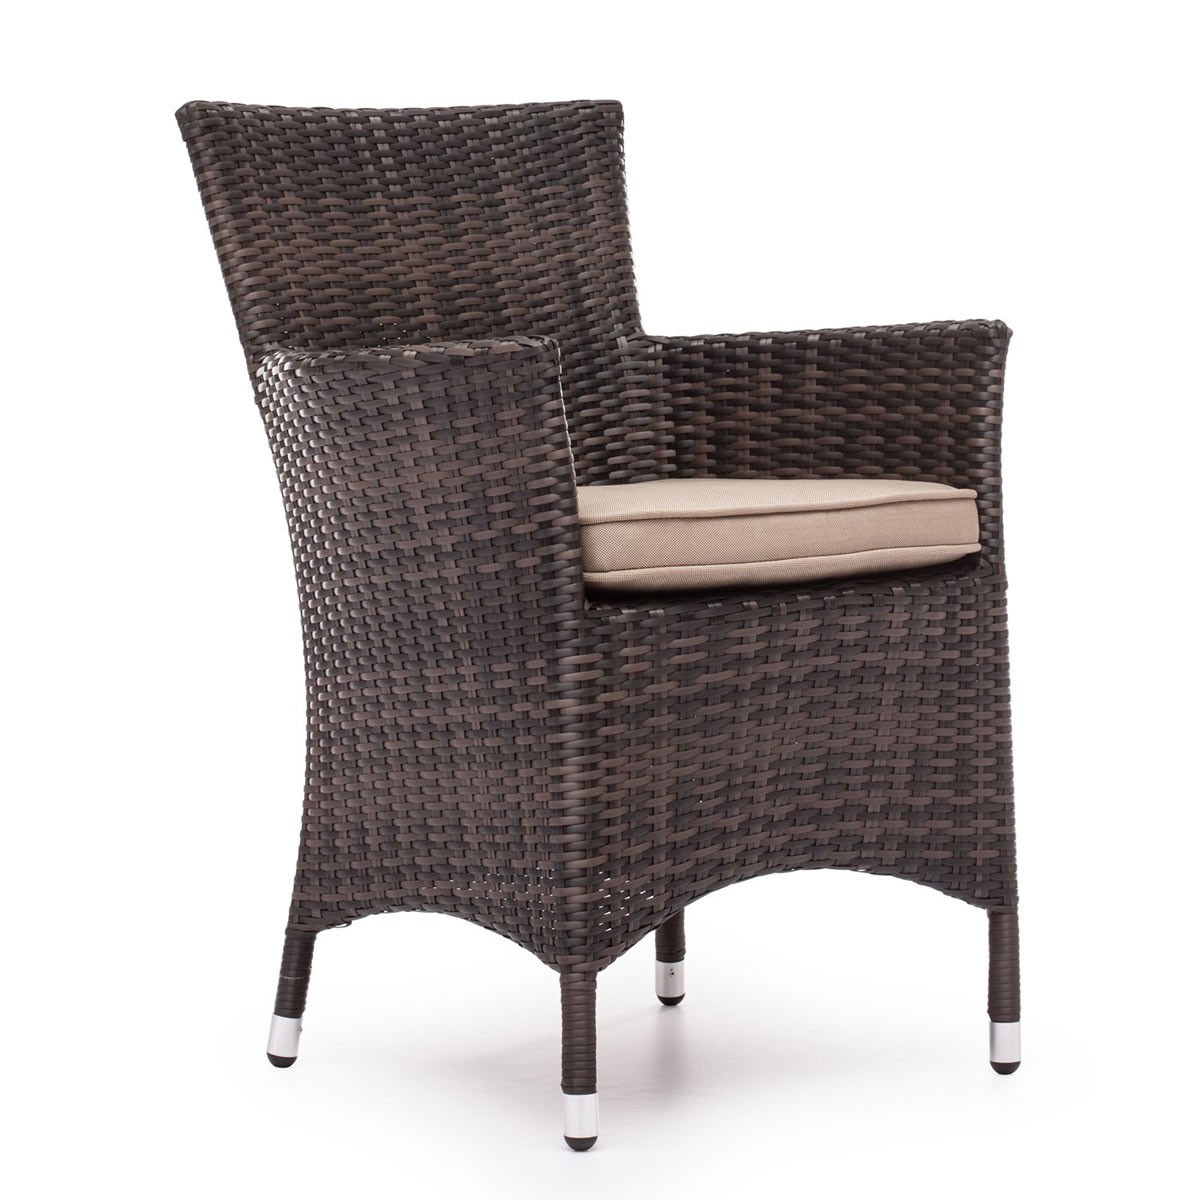 Zuo Modern South Bay Dining Chair - Brown